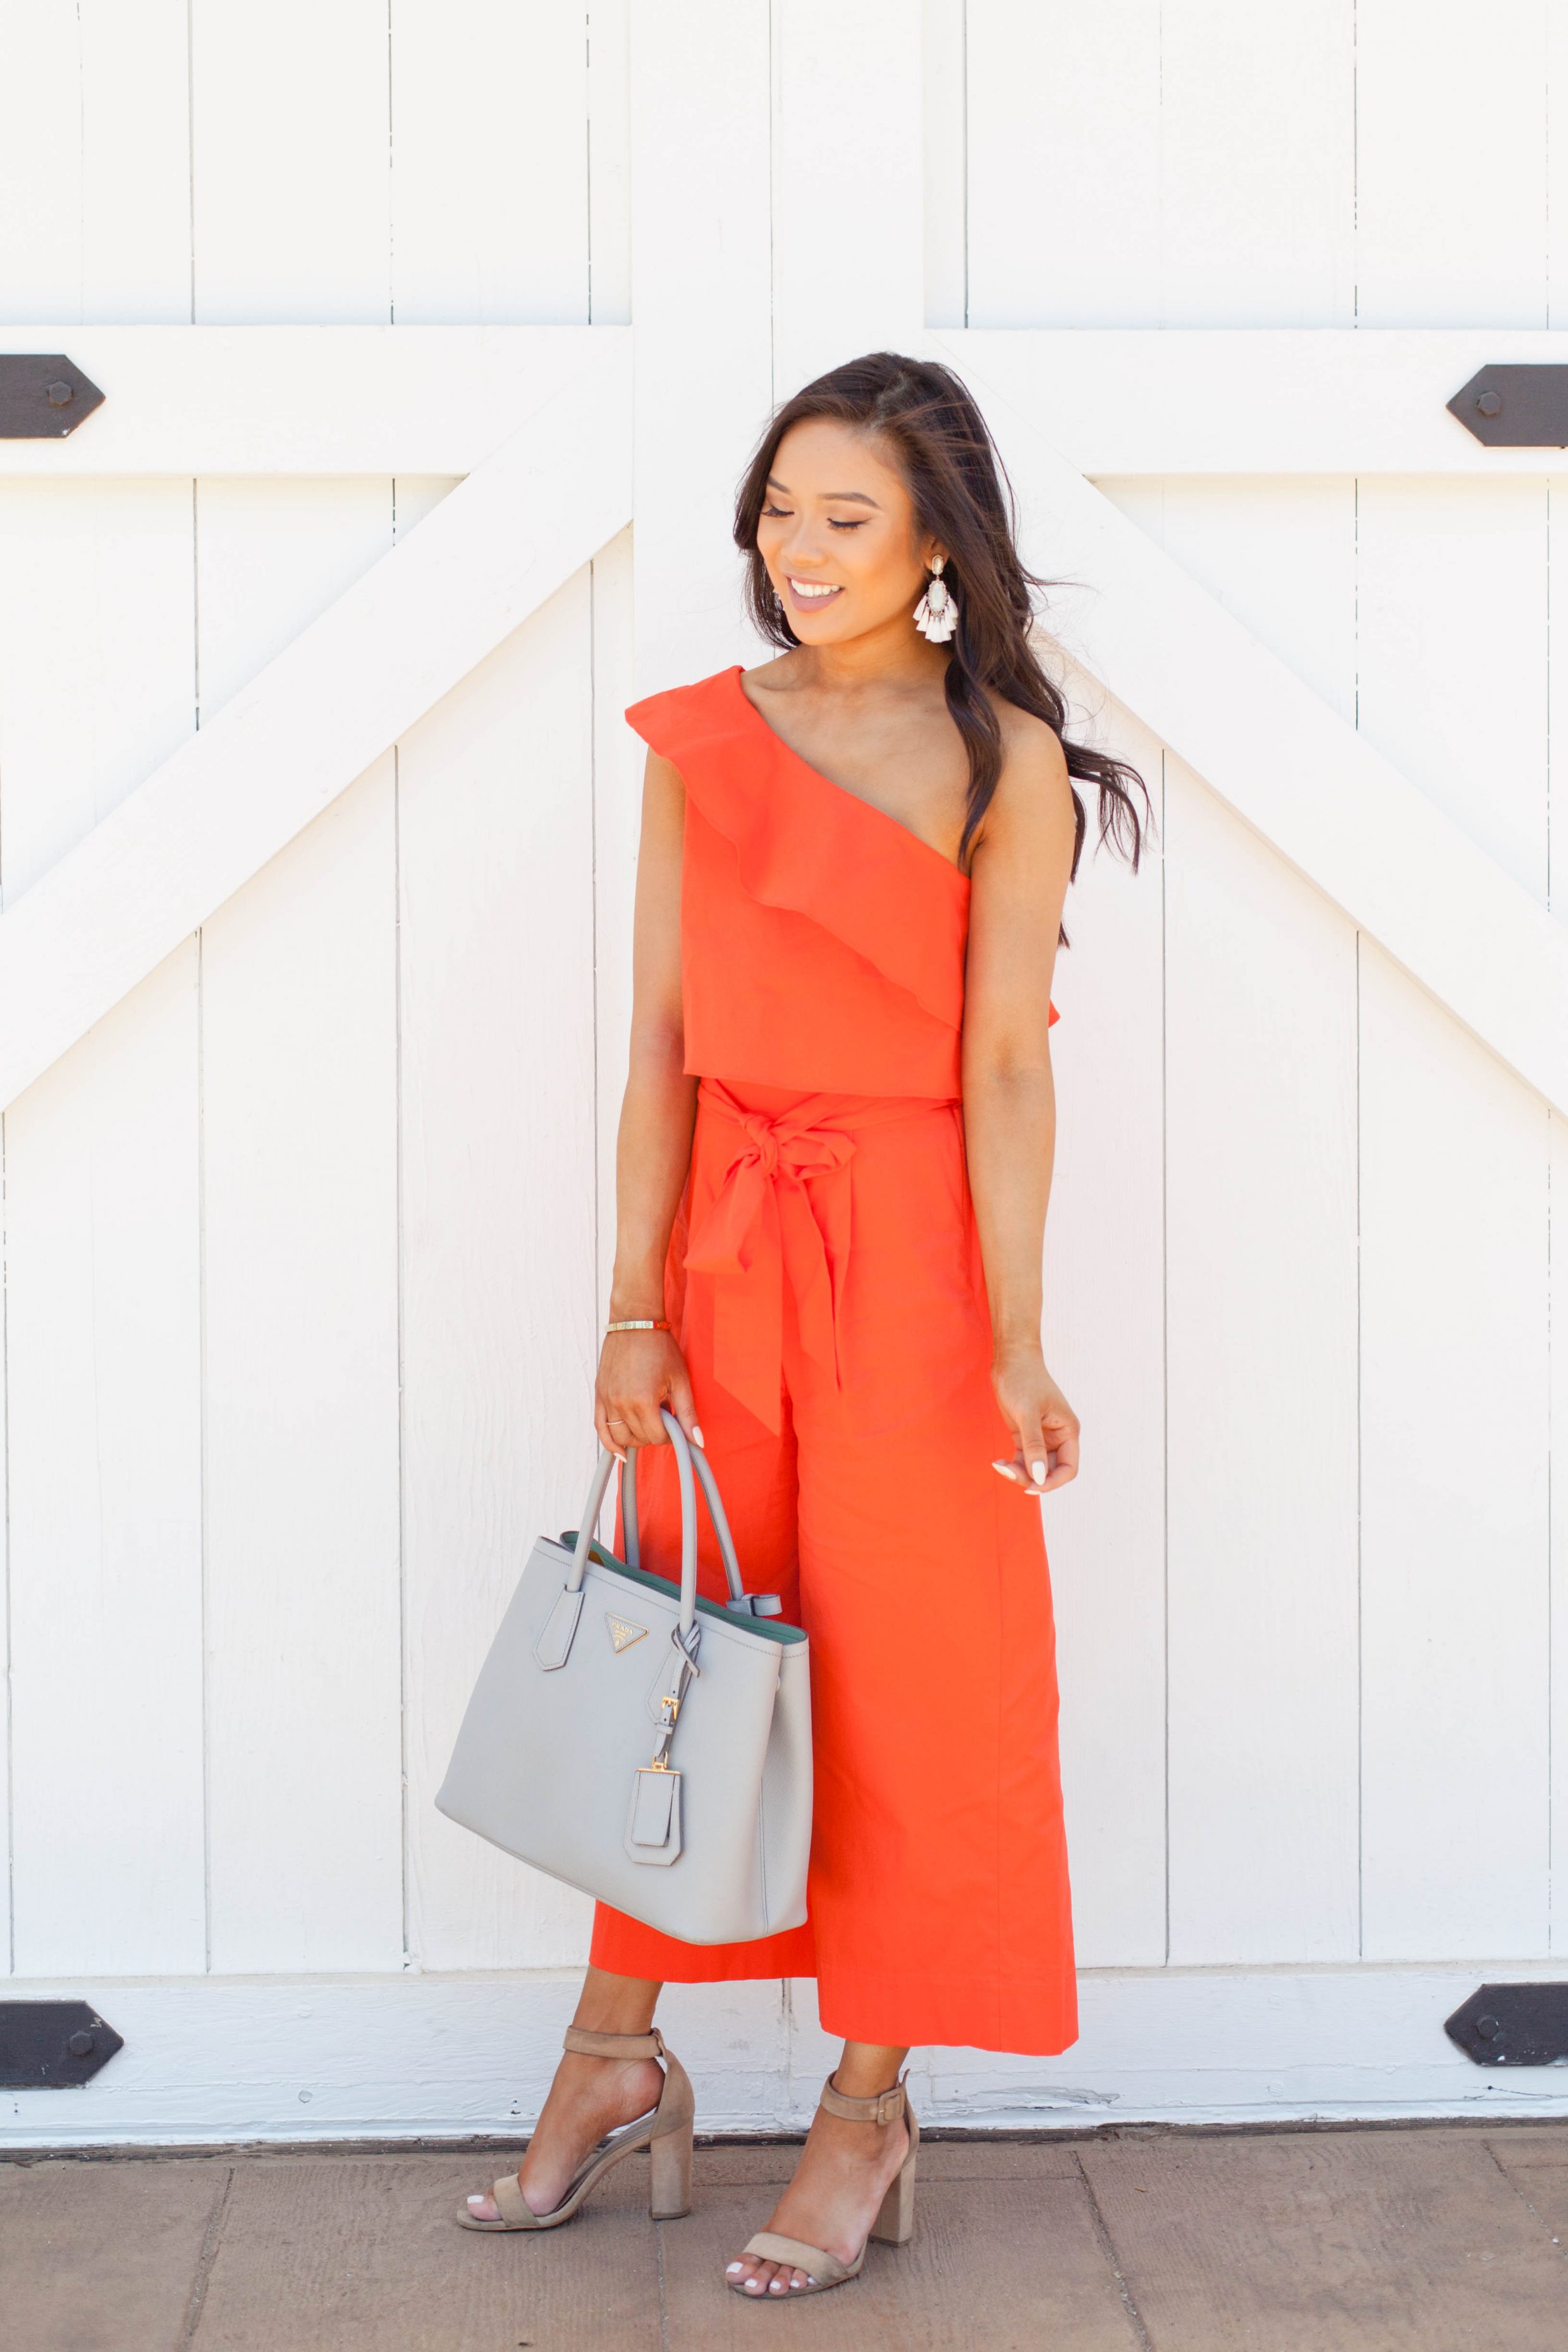 Summer outfit idea orange one-shouldered jumpsuit less than $100